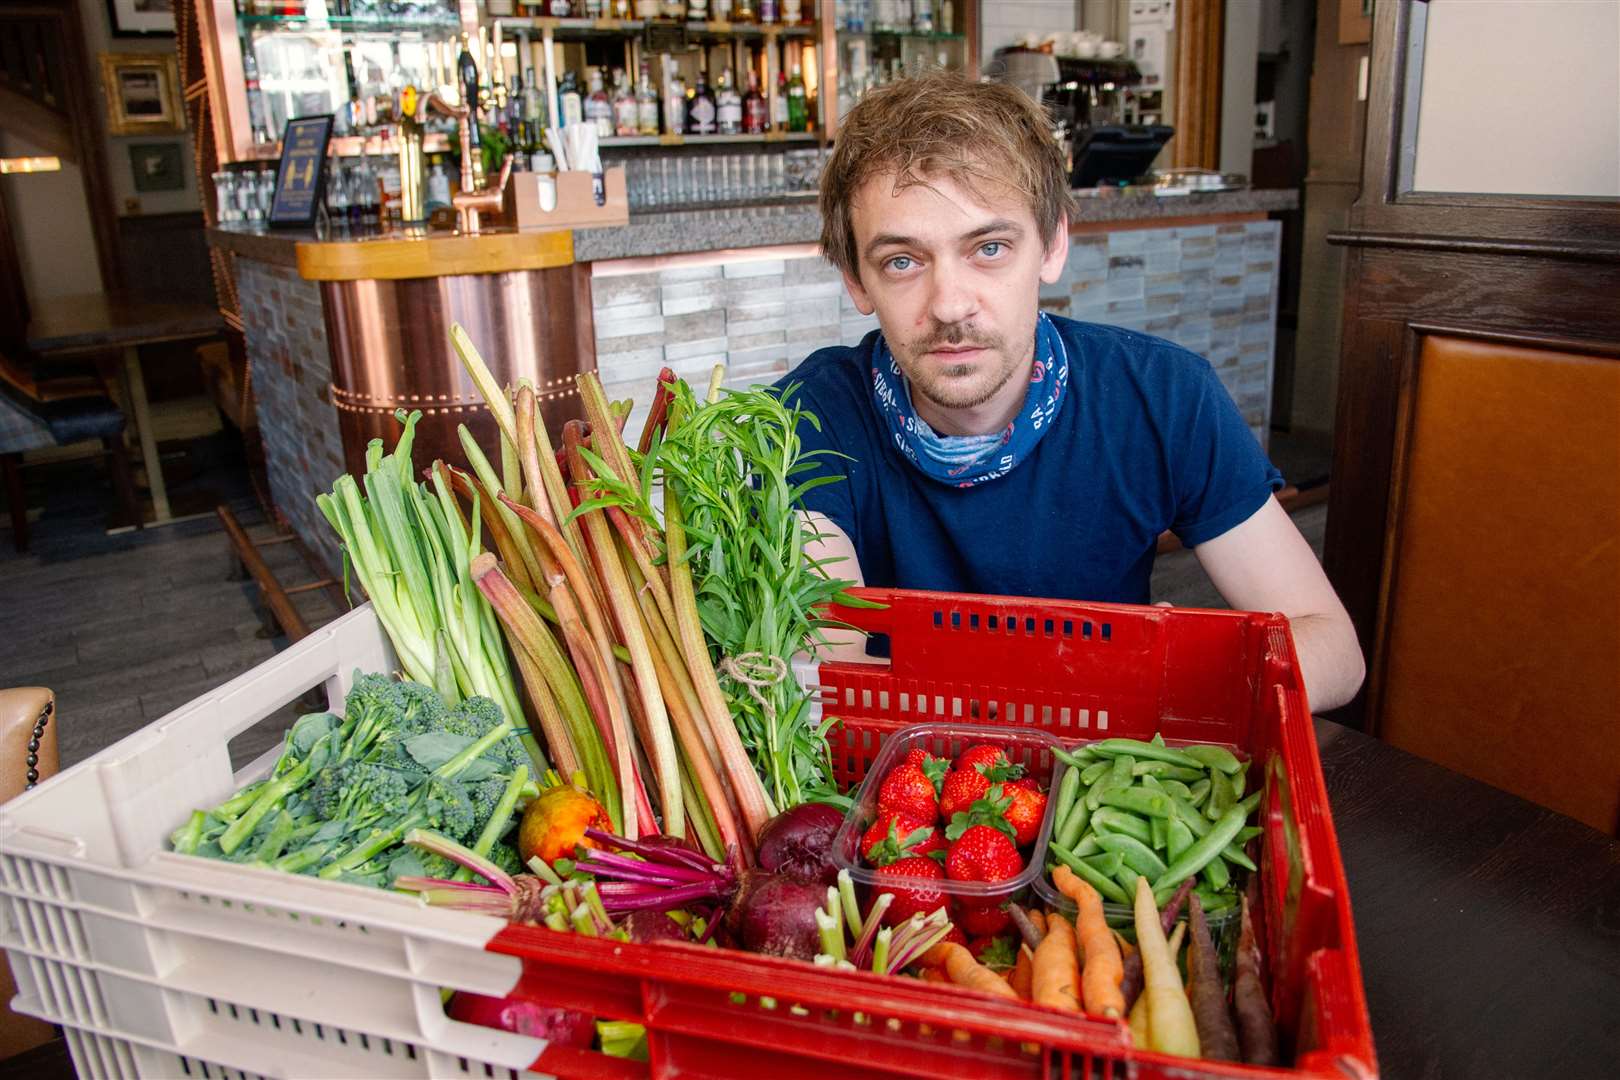 Head chef Henry with locally grown fruit and vegatables.